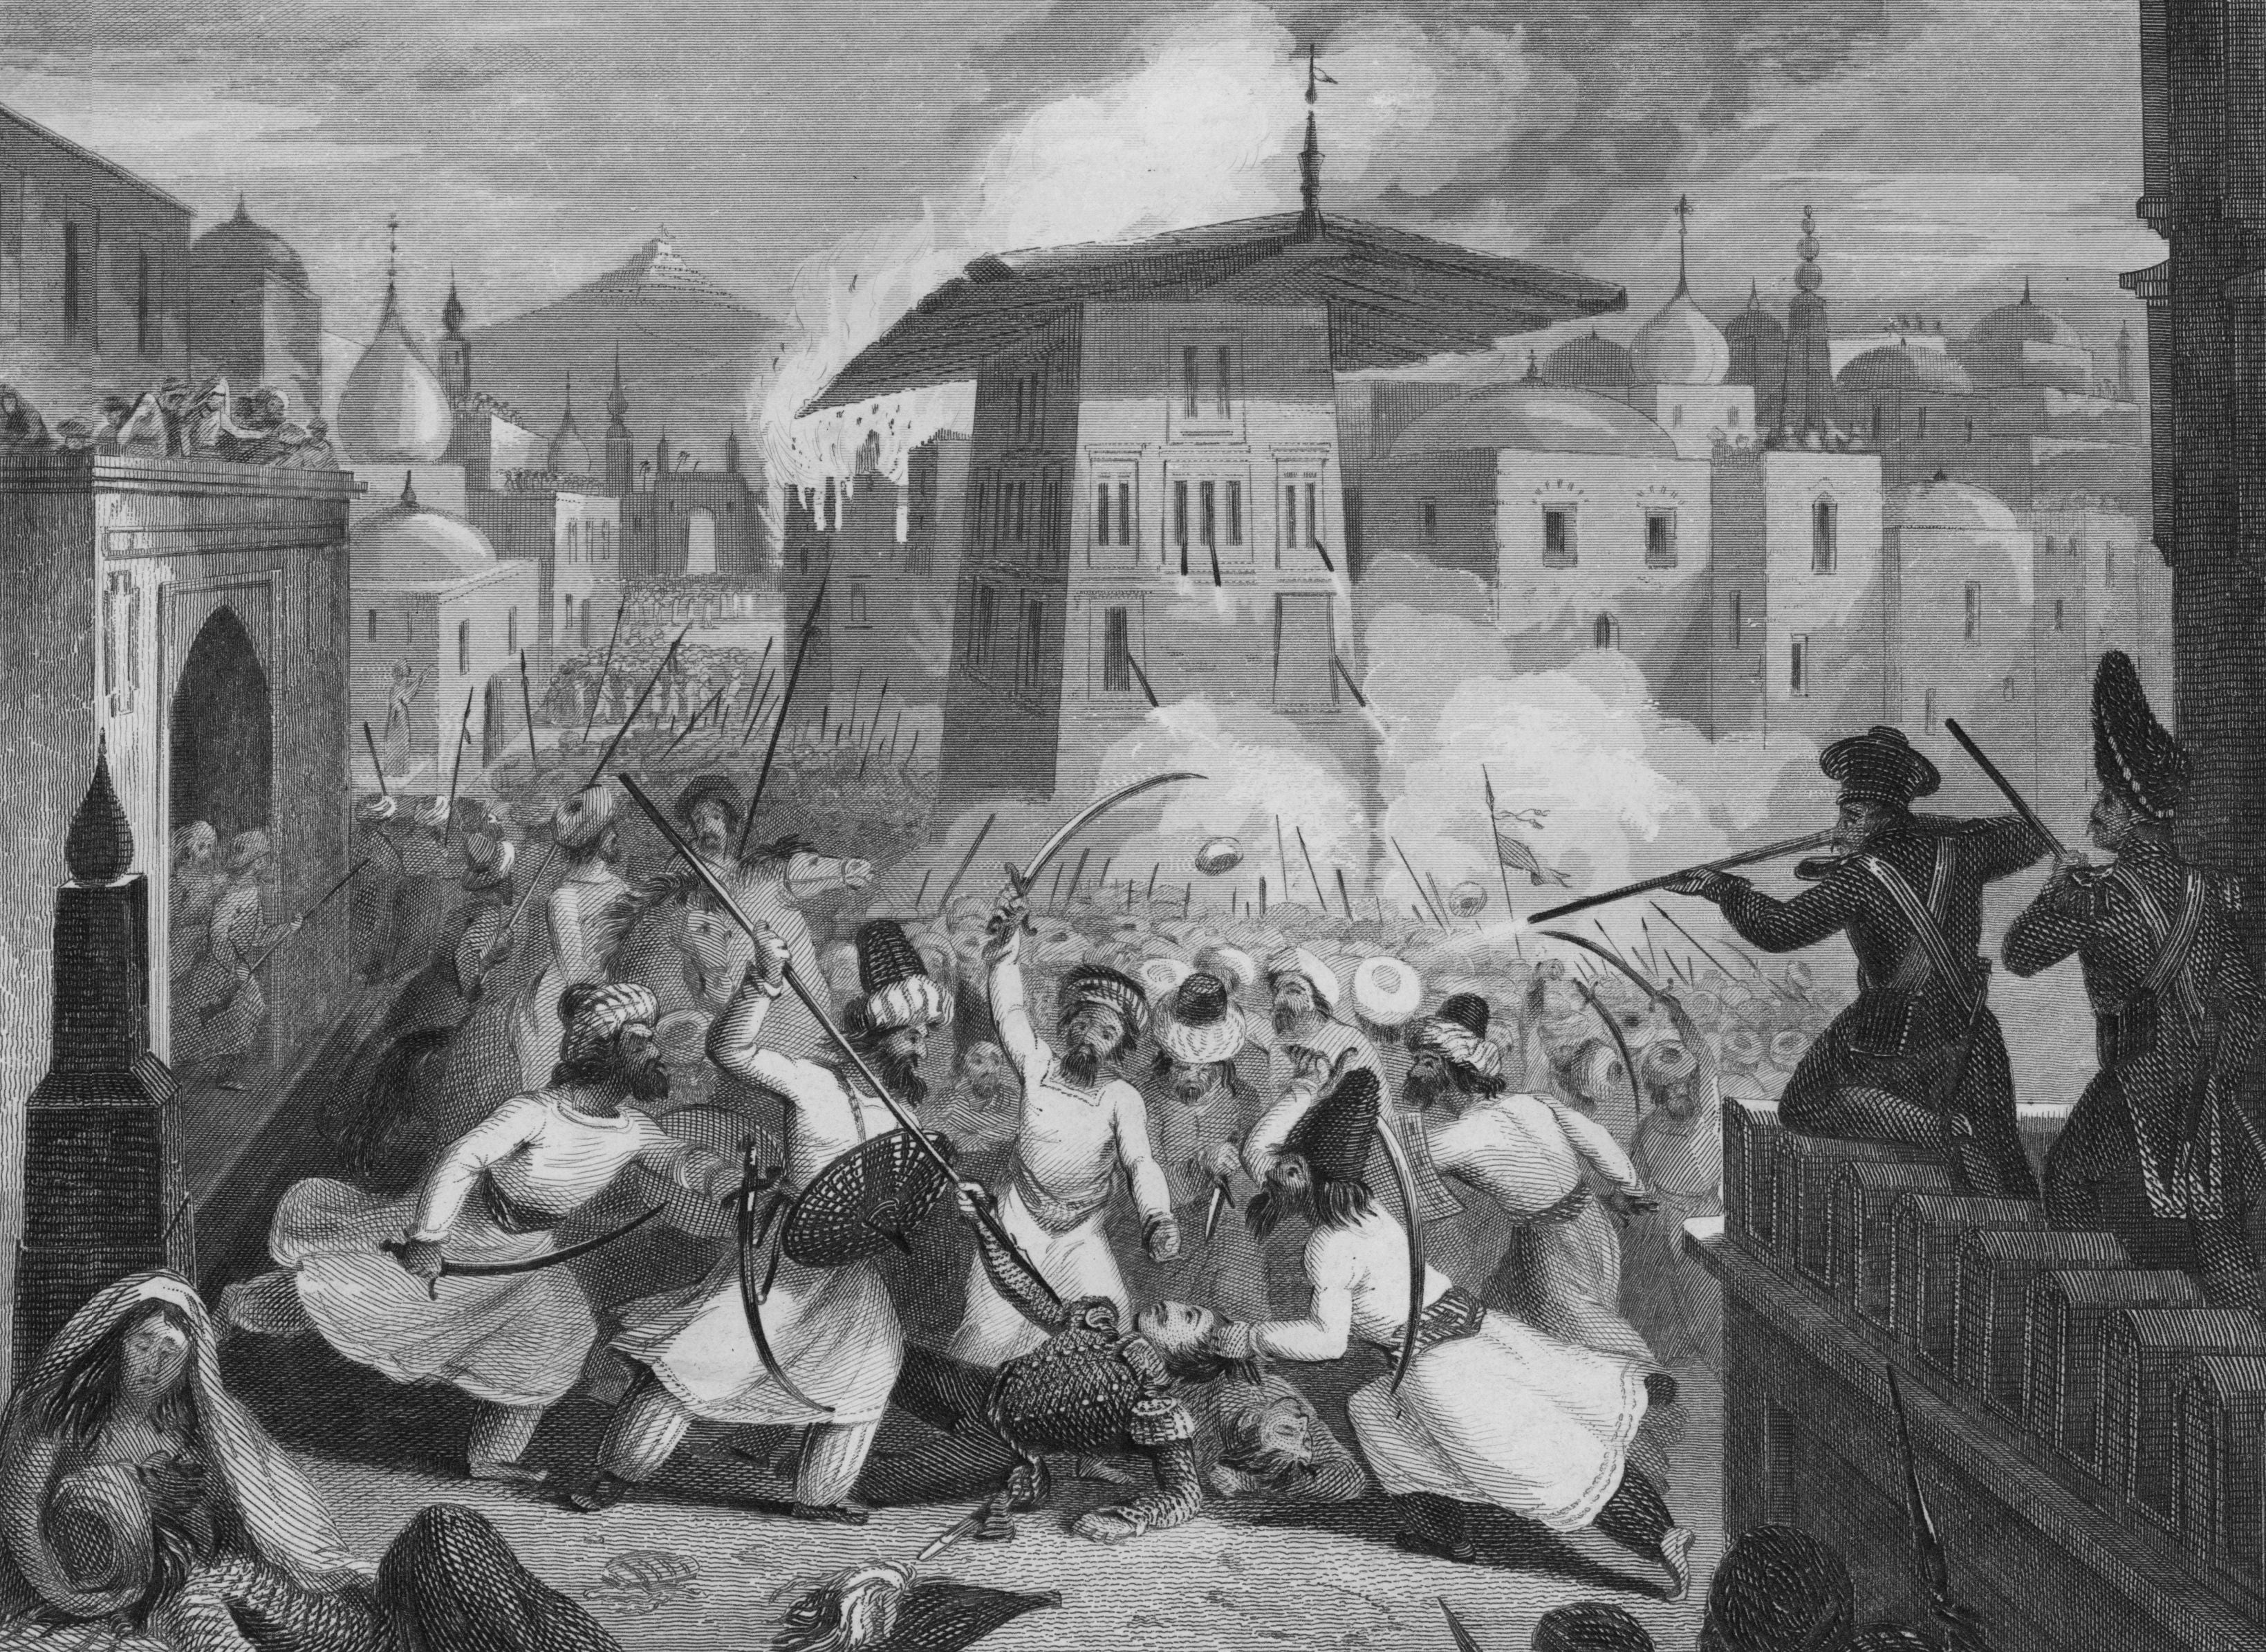 Assassination of Sir Alexander Burnes at Kabul, where the British were trying to place a puppet on the throne. The intervention resulted in most of the 16,000 men deployed being killed